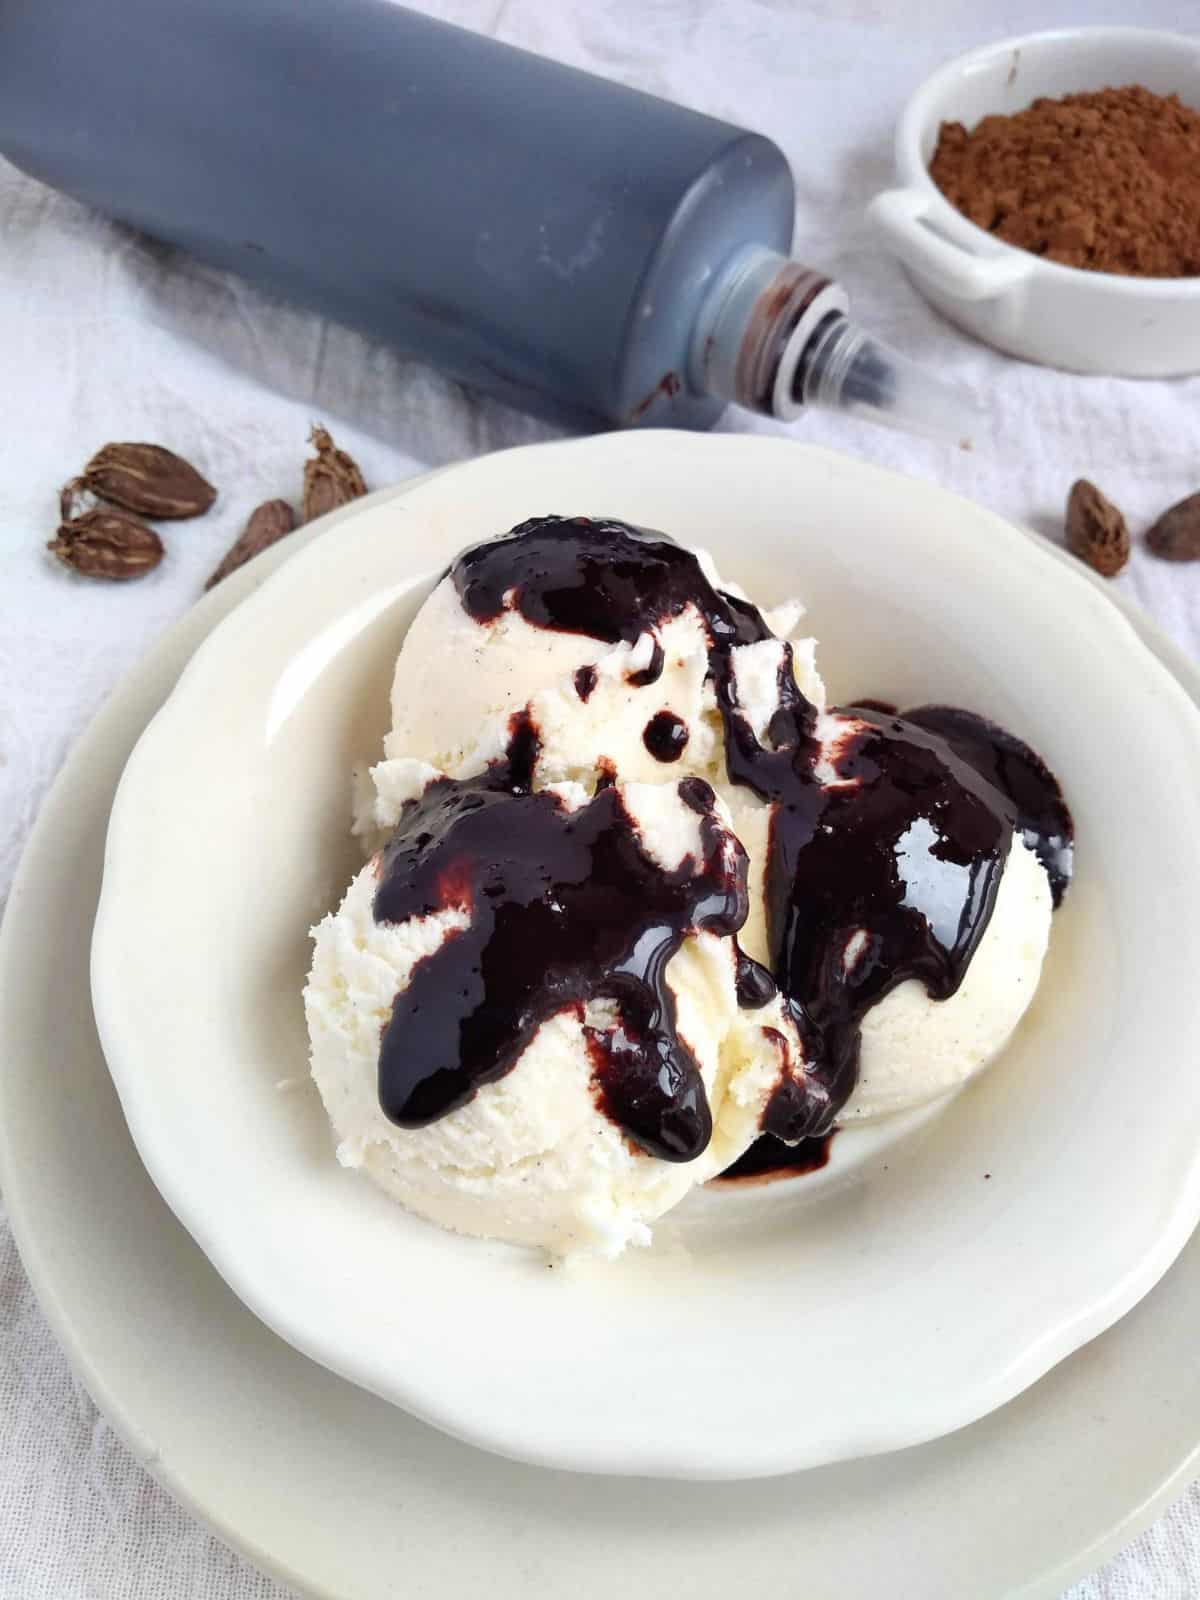 A white bowl with 3 scoop of vanilla ice cream topped with chocolate cardamom syrup. The bottle of syrup is next to the bowl along with whole cardamom pods.